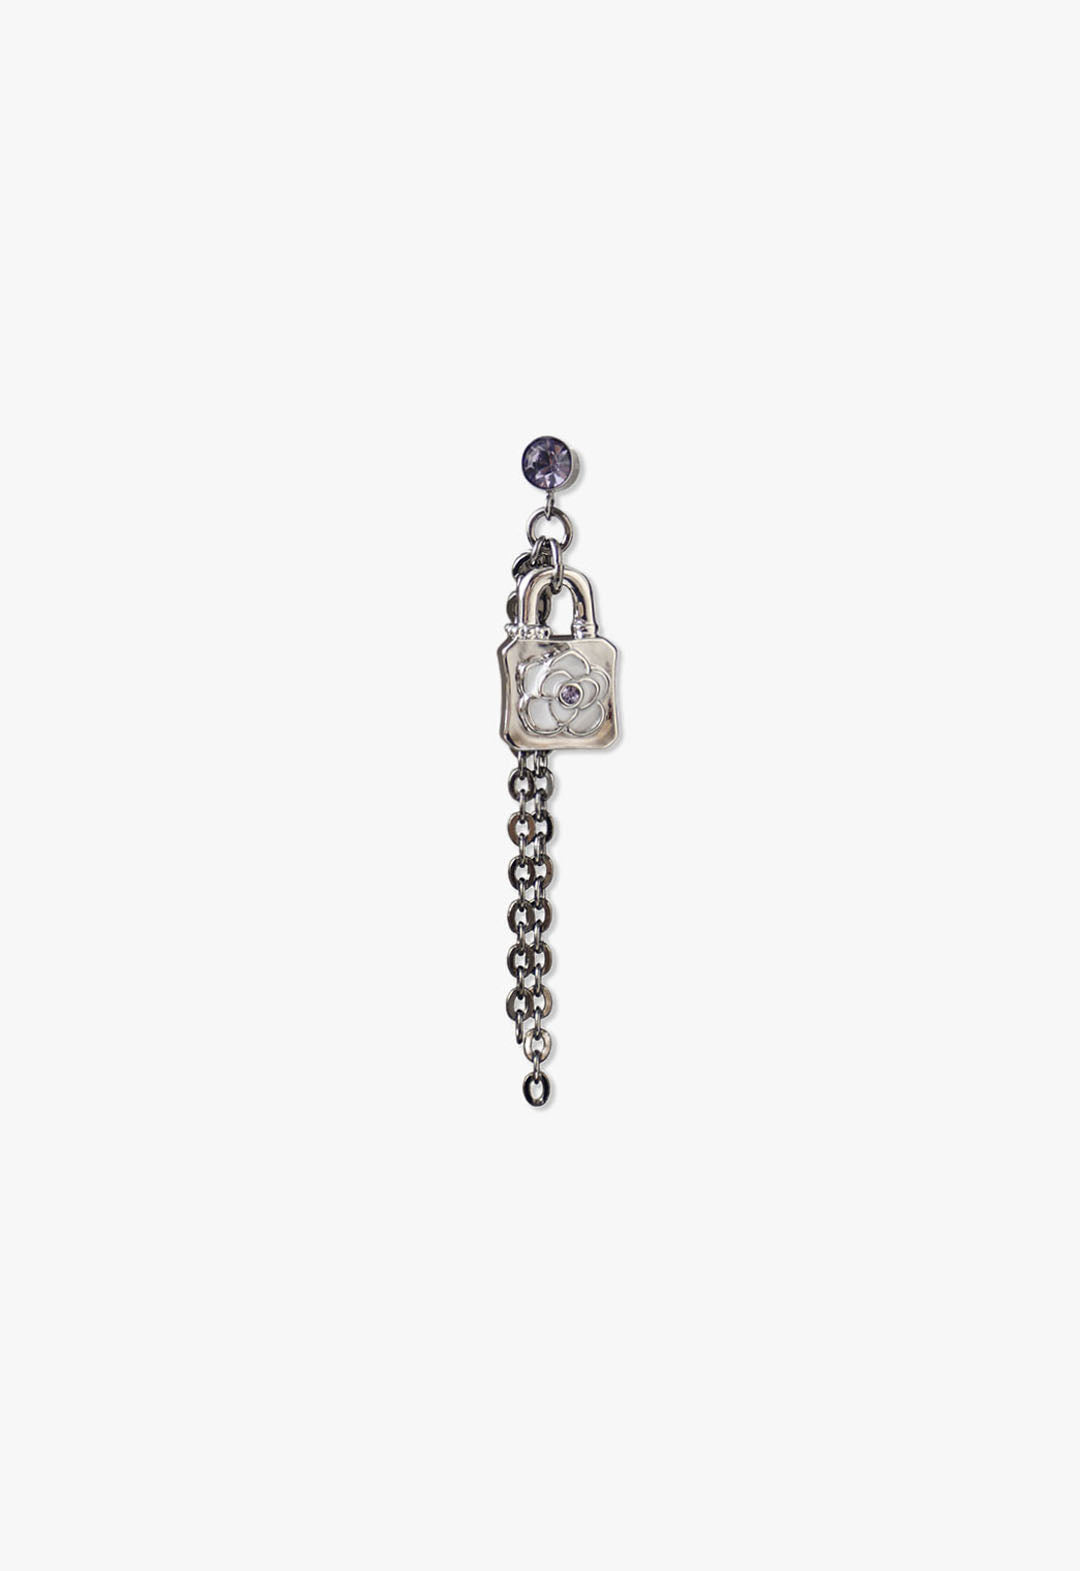 Metal silver plating, large links chain, a lock with a white rose a blue stone at center, studs come with a purple stone